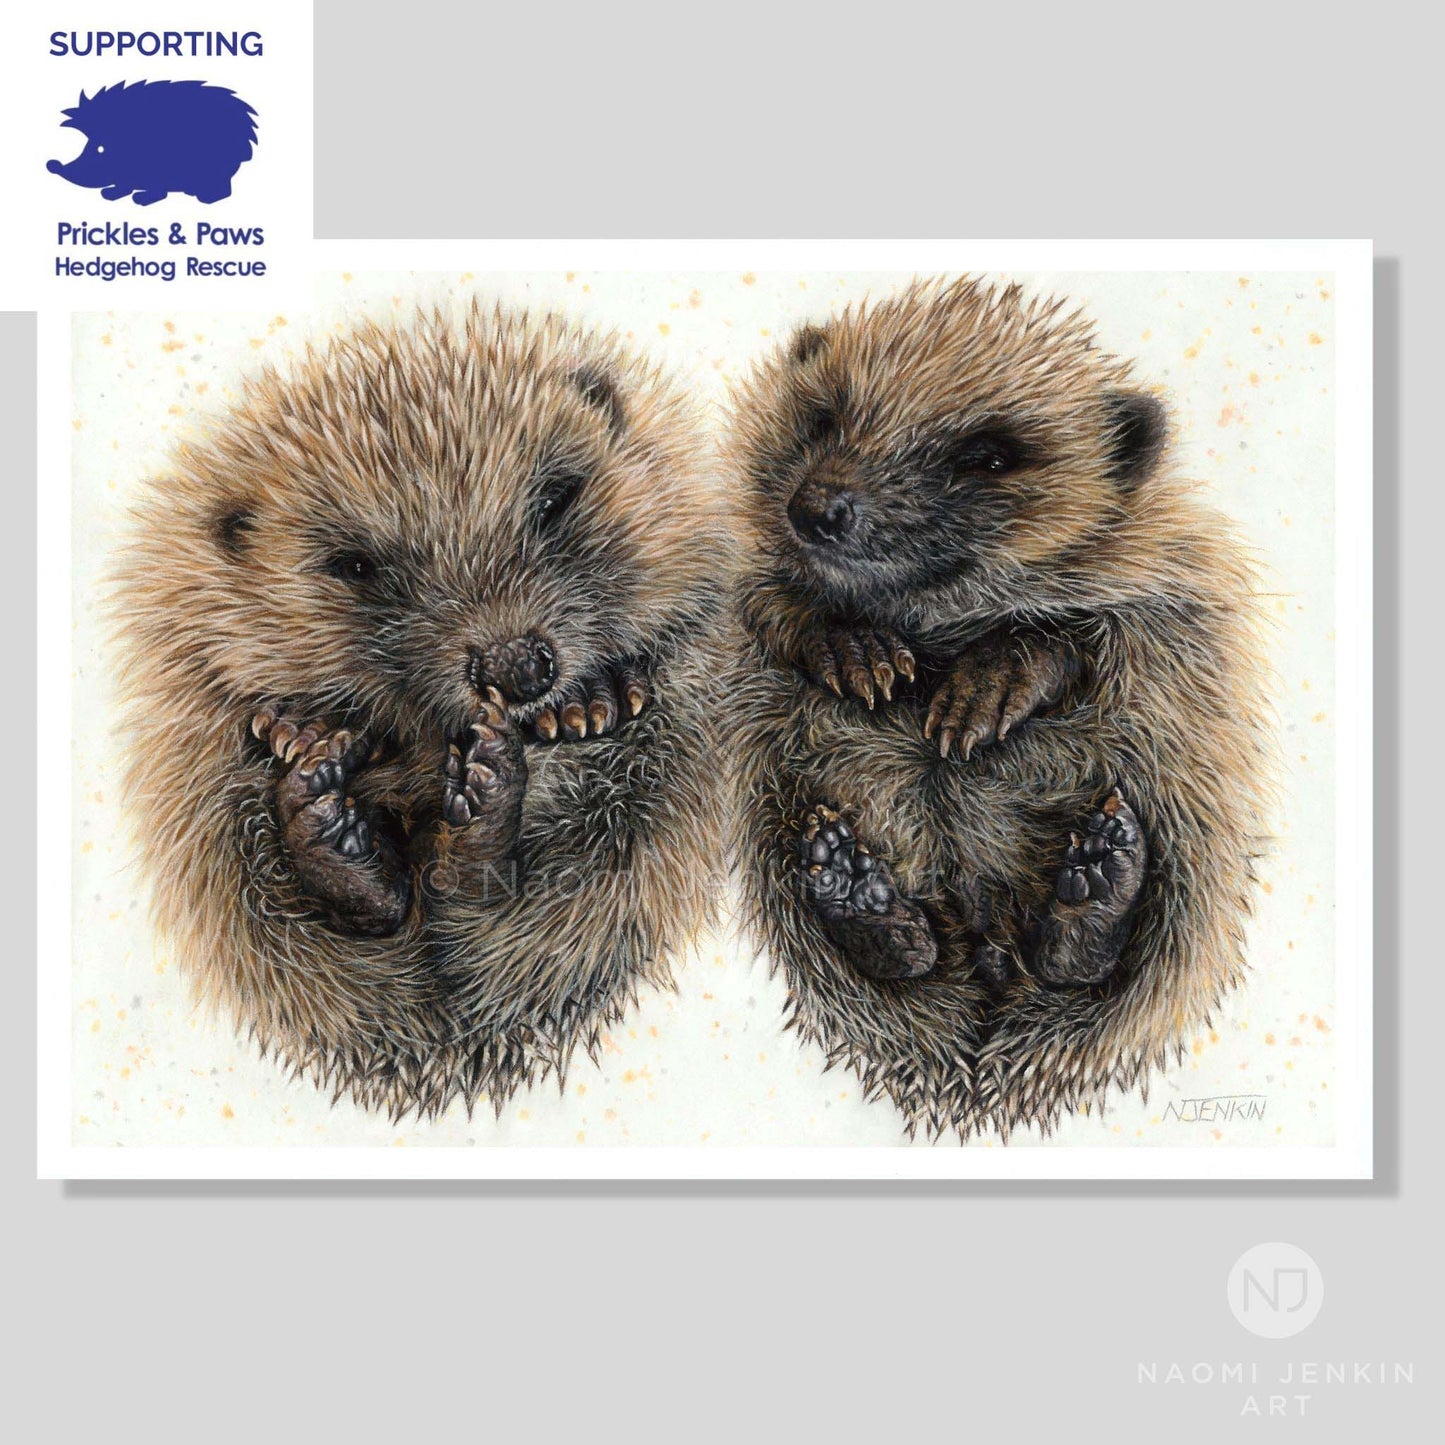 Hedgehog art print by Naomi Jenkin Art in support of Prickles and Paws Hedgehog Rescue. 